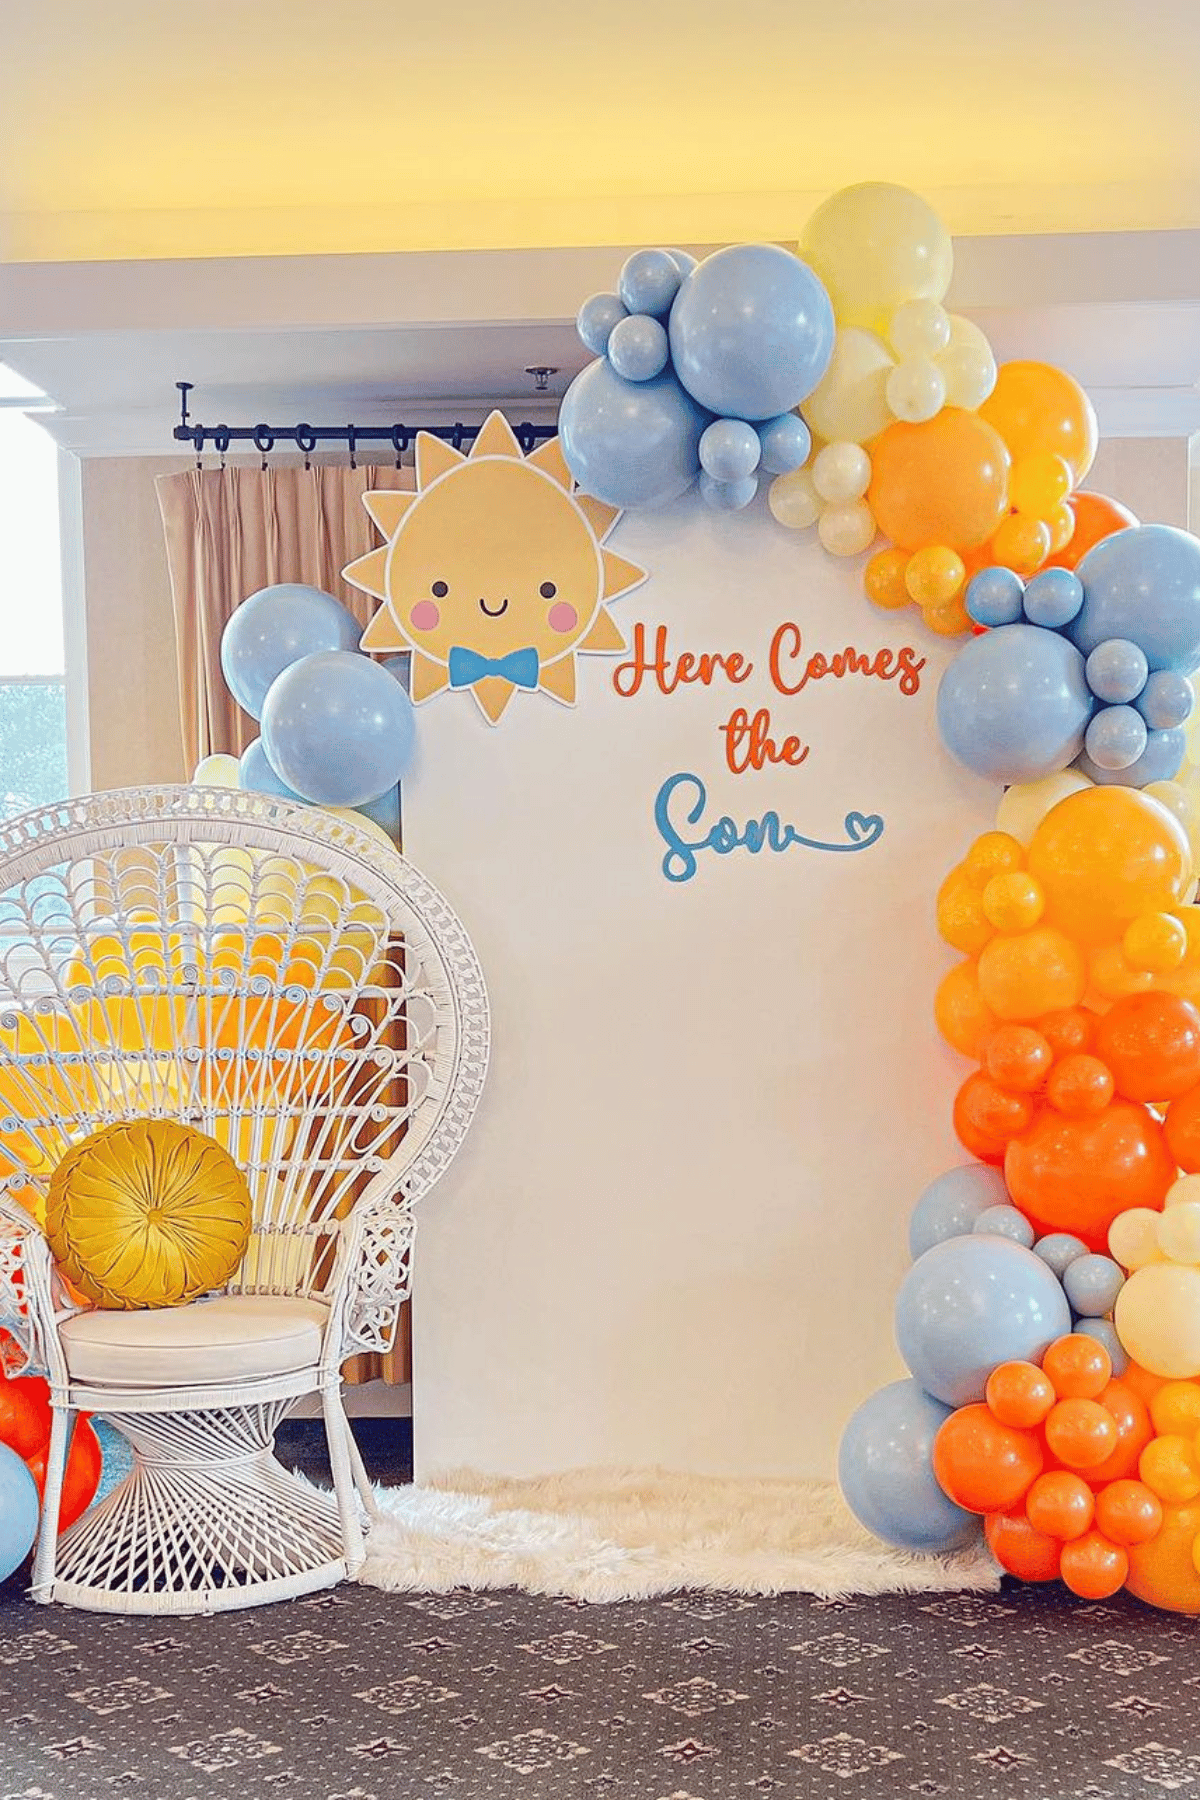 sun theme with yellow, blue and orange accents